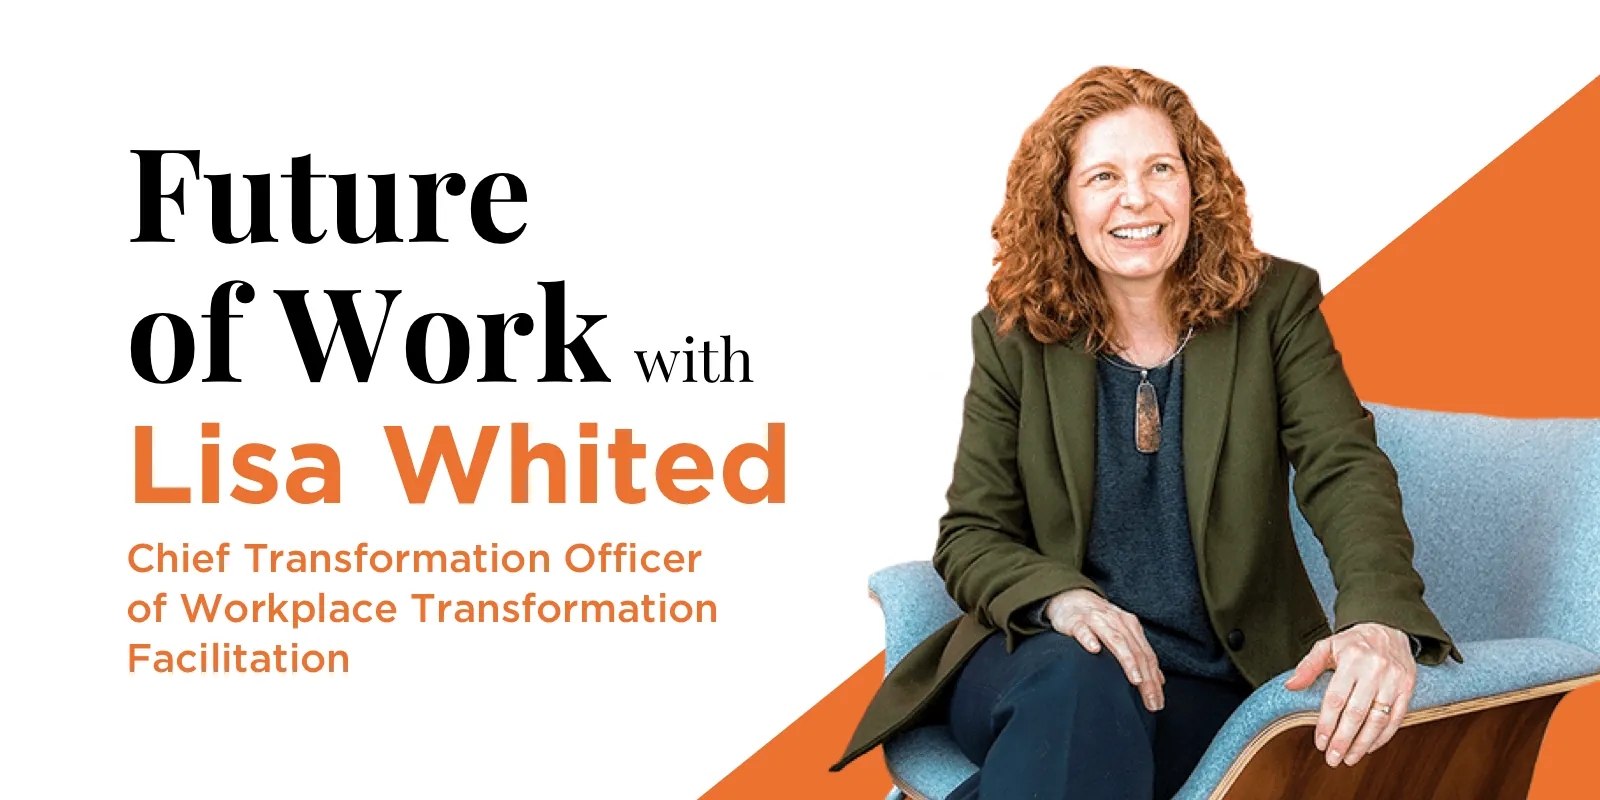 Future of work with Lisa Whited